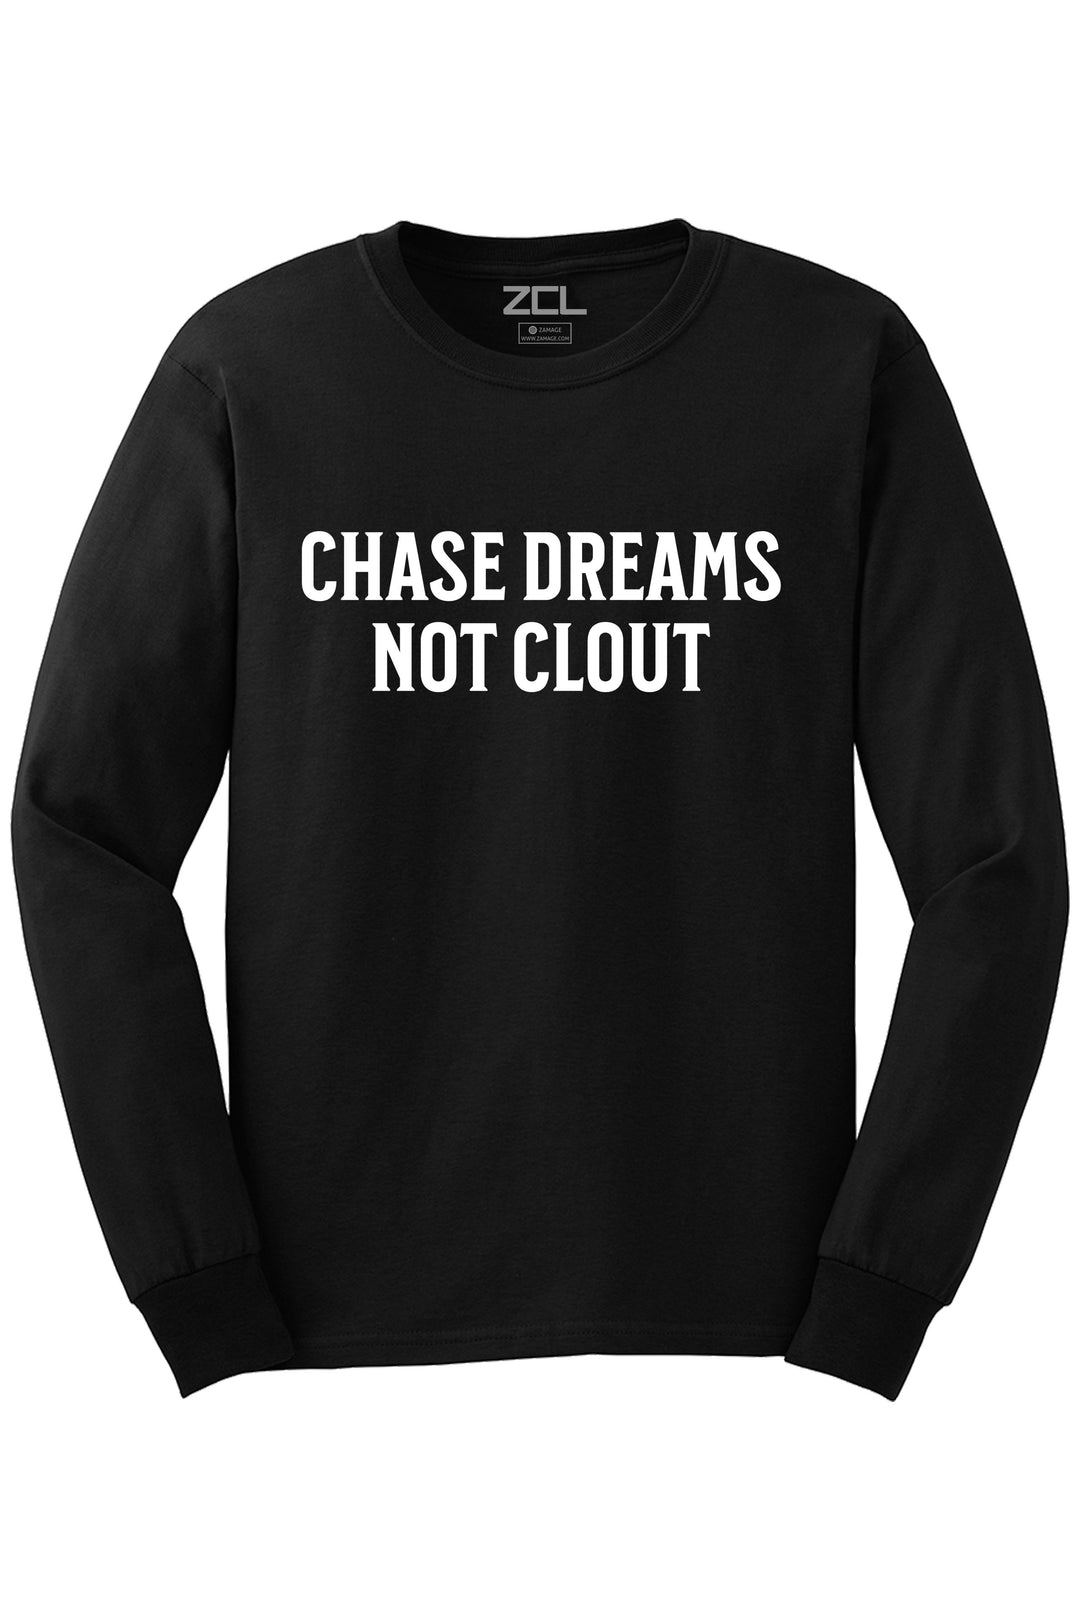 Chase Dreams Not Clout Long Sleeve Tee (White Logo) - Zamage